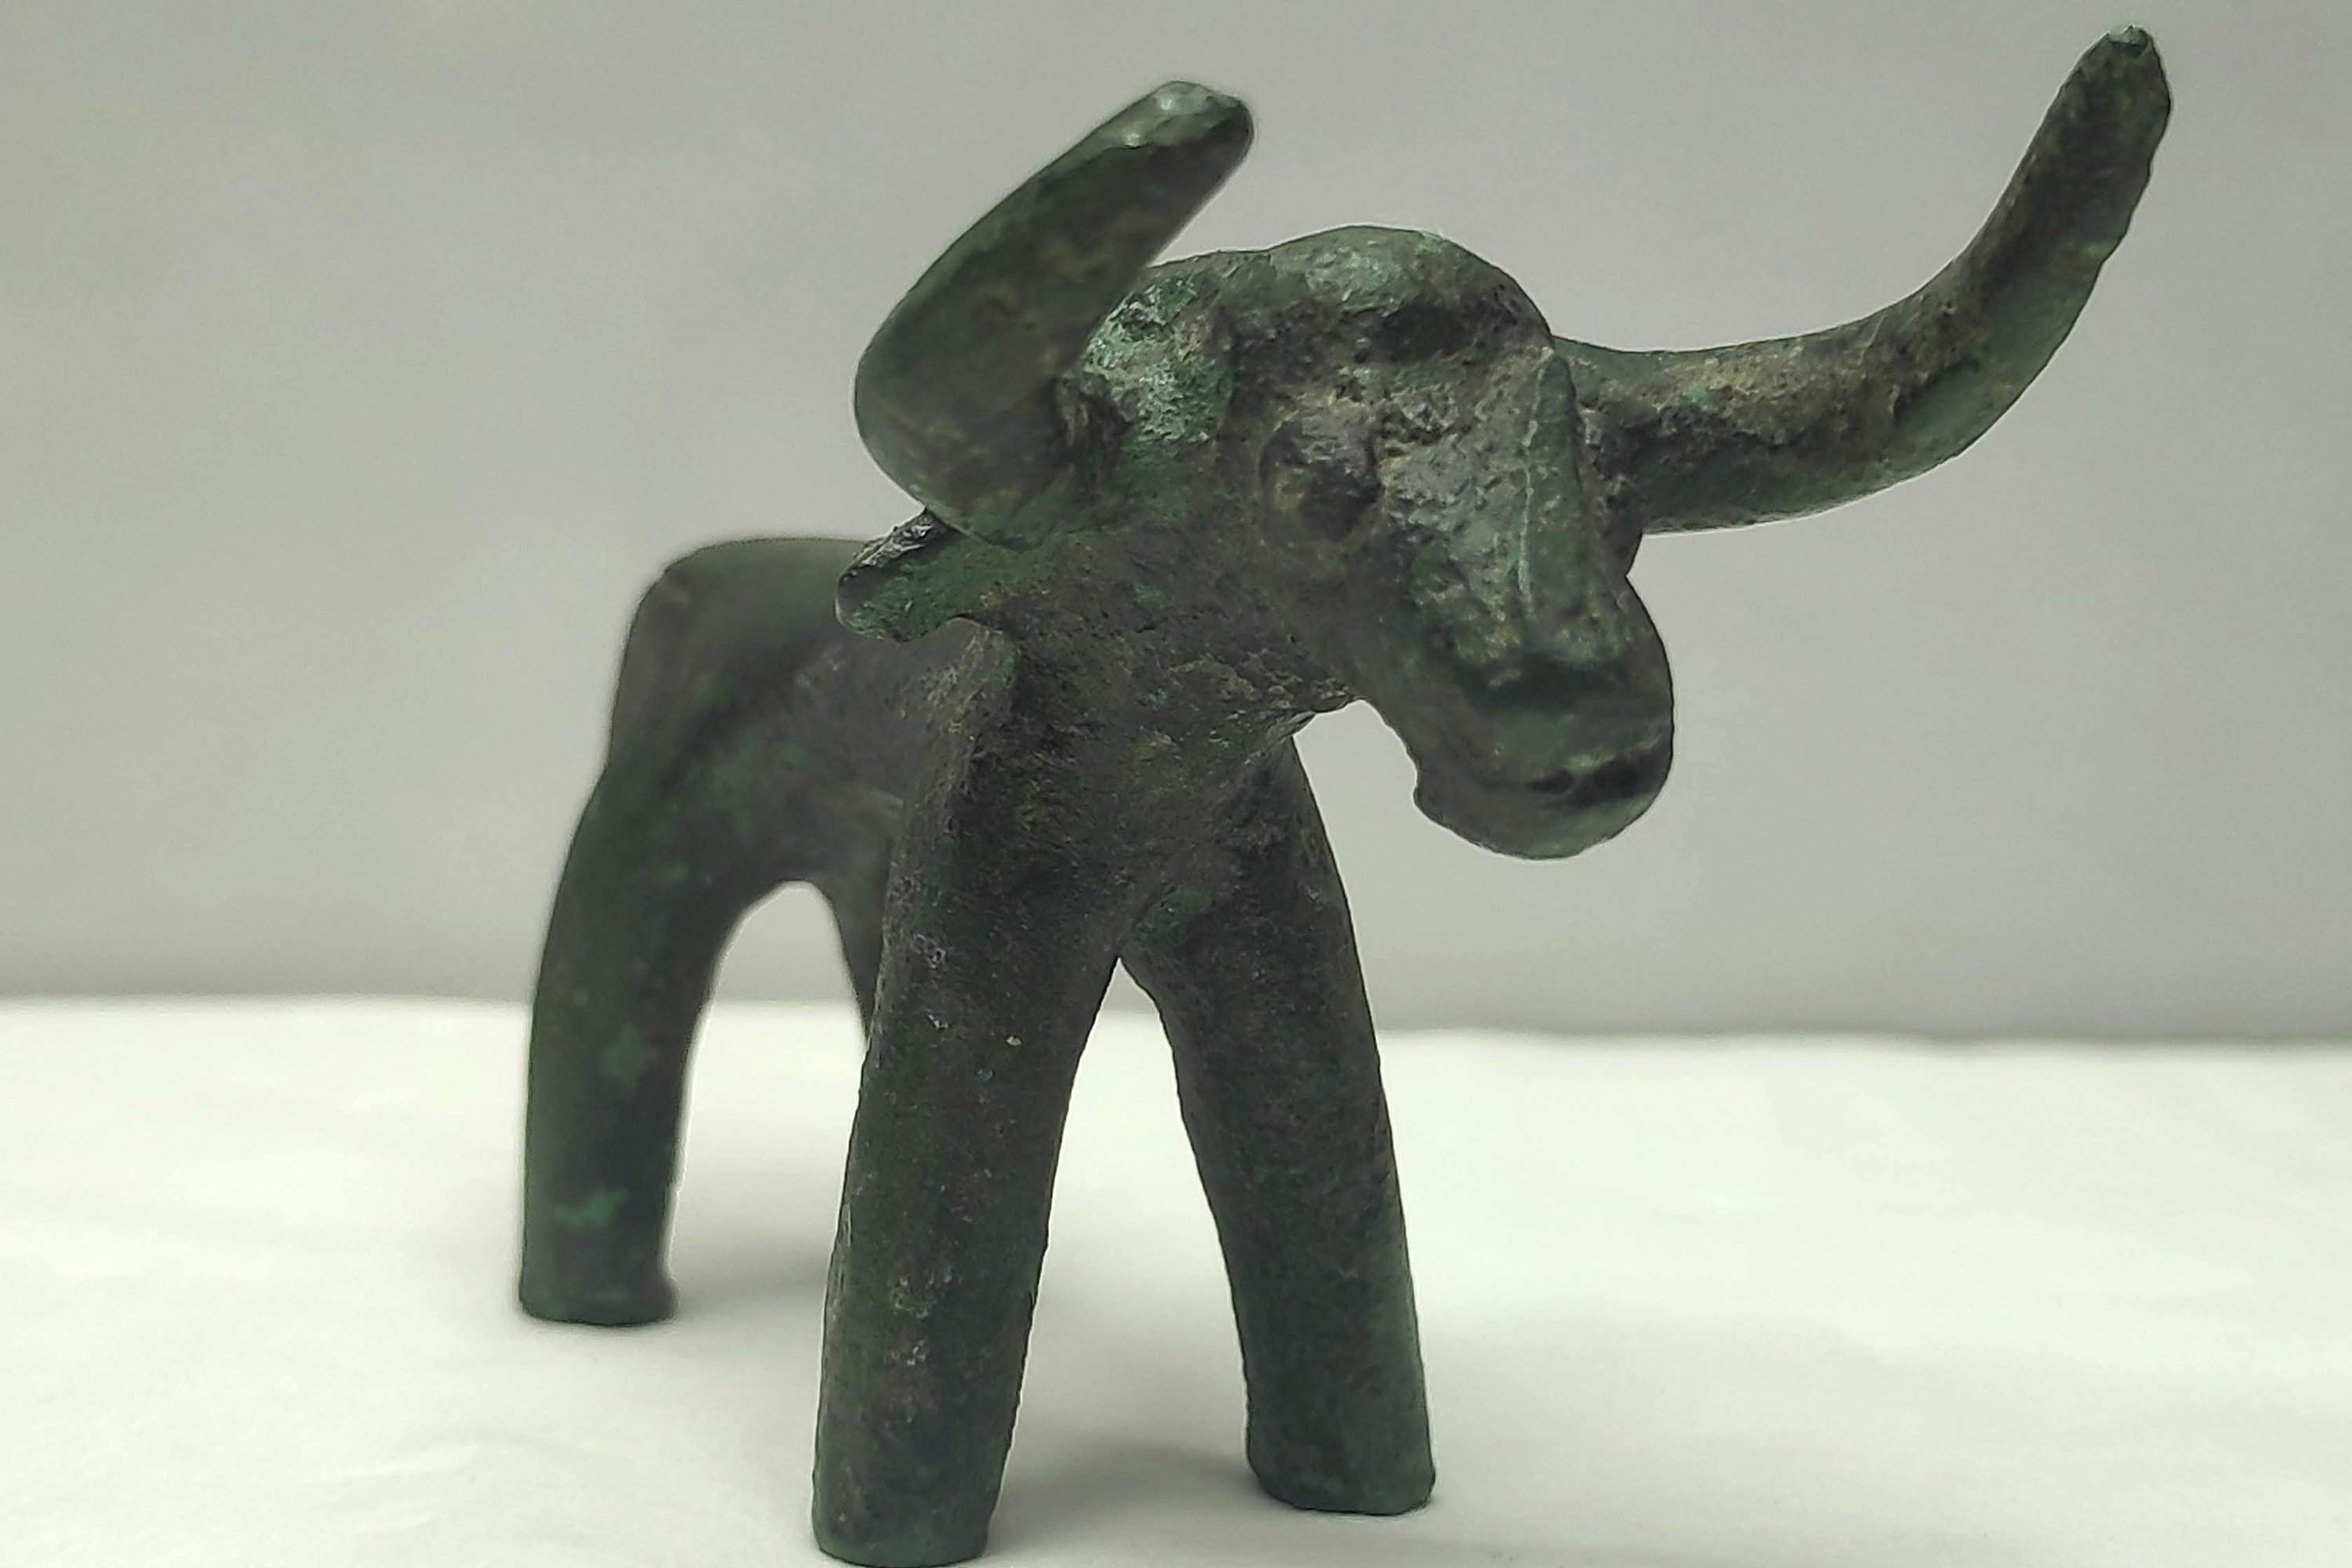 Antique bronze bull figurine discovered in southern Greece